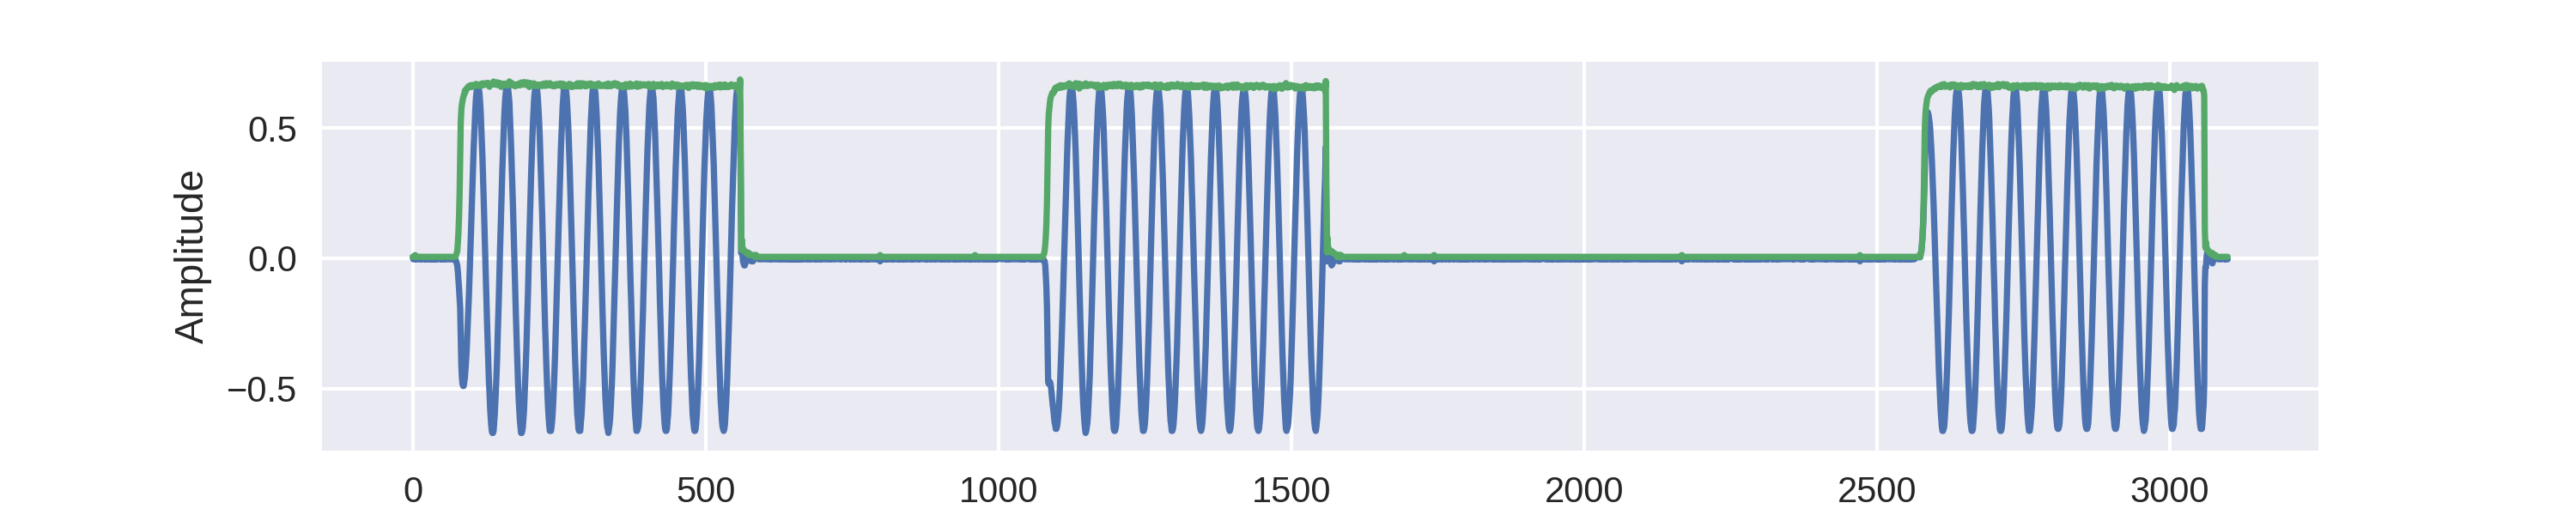 Time domain of a short segment of  key fob signal illustrating the binary-AM modulation. Real part in blue,  magnitude shown in green. 